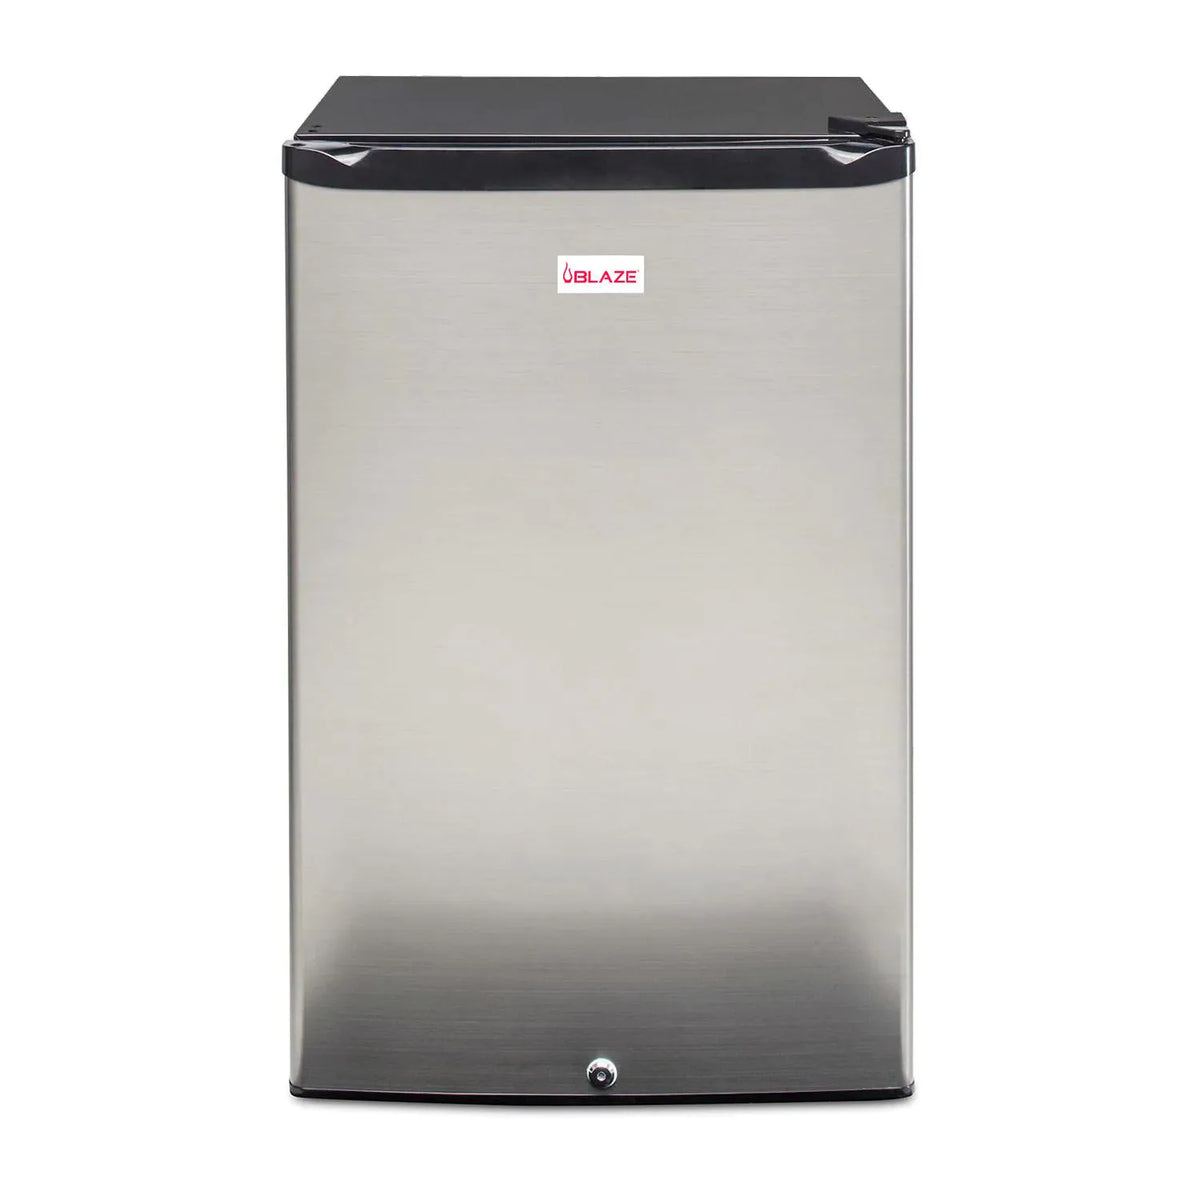 Blaze 20 Inch Outdoor Compact Refrigerator Front View